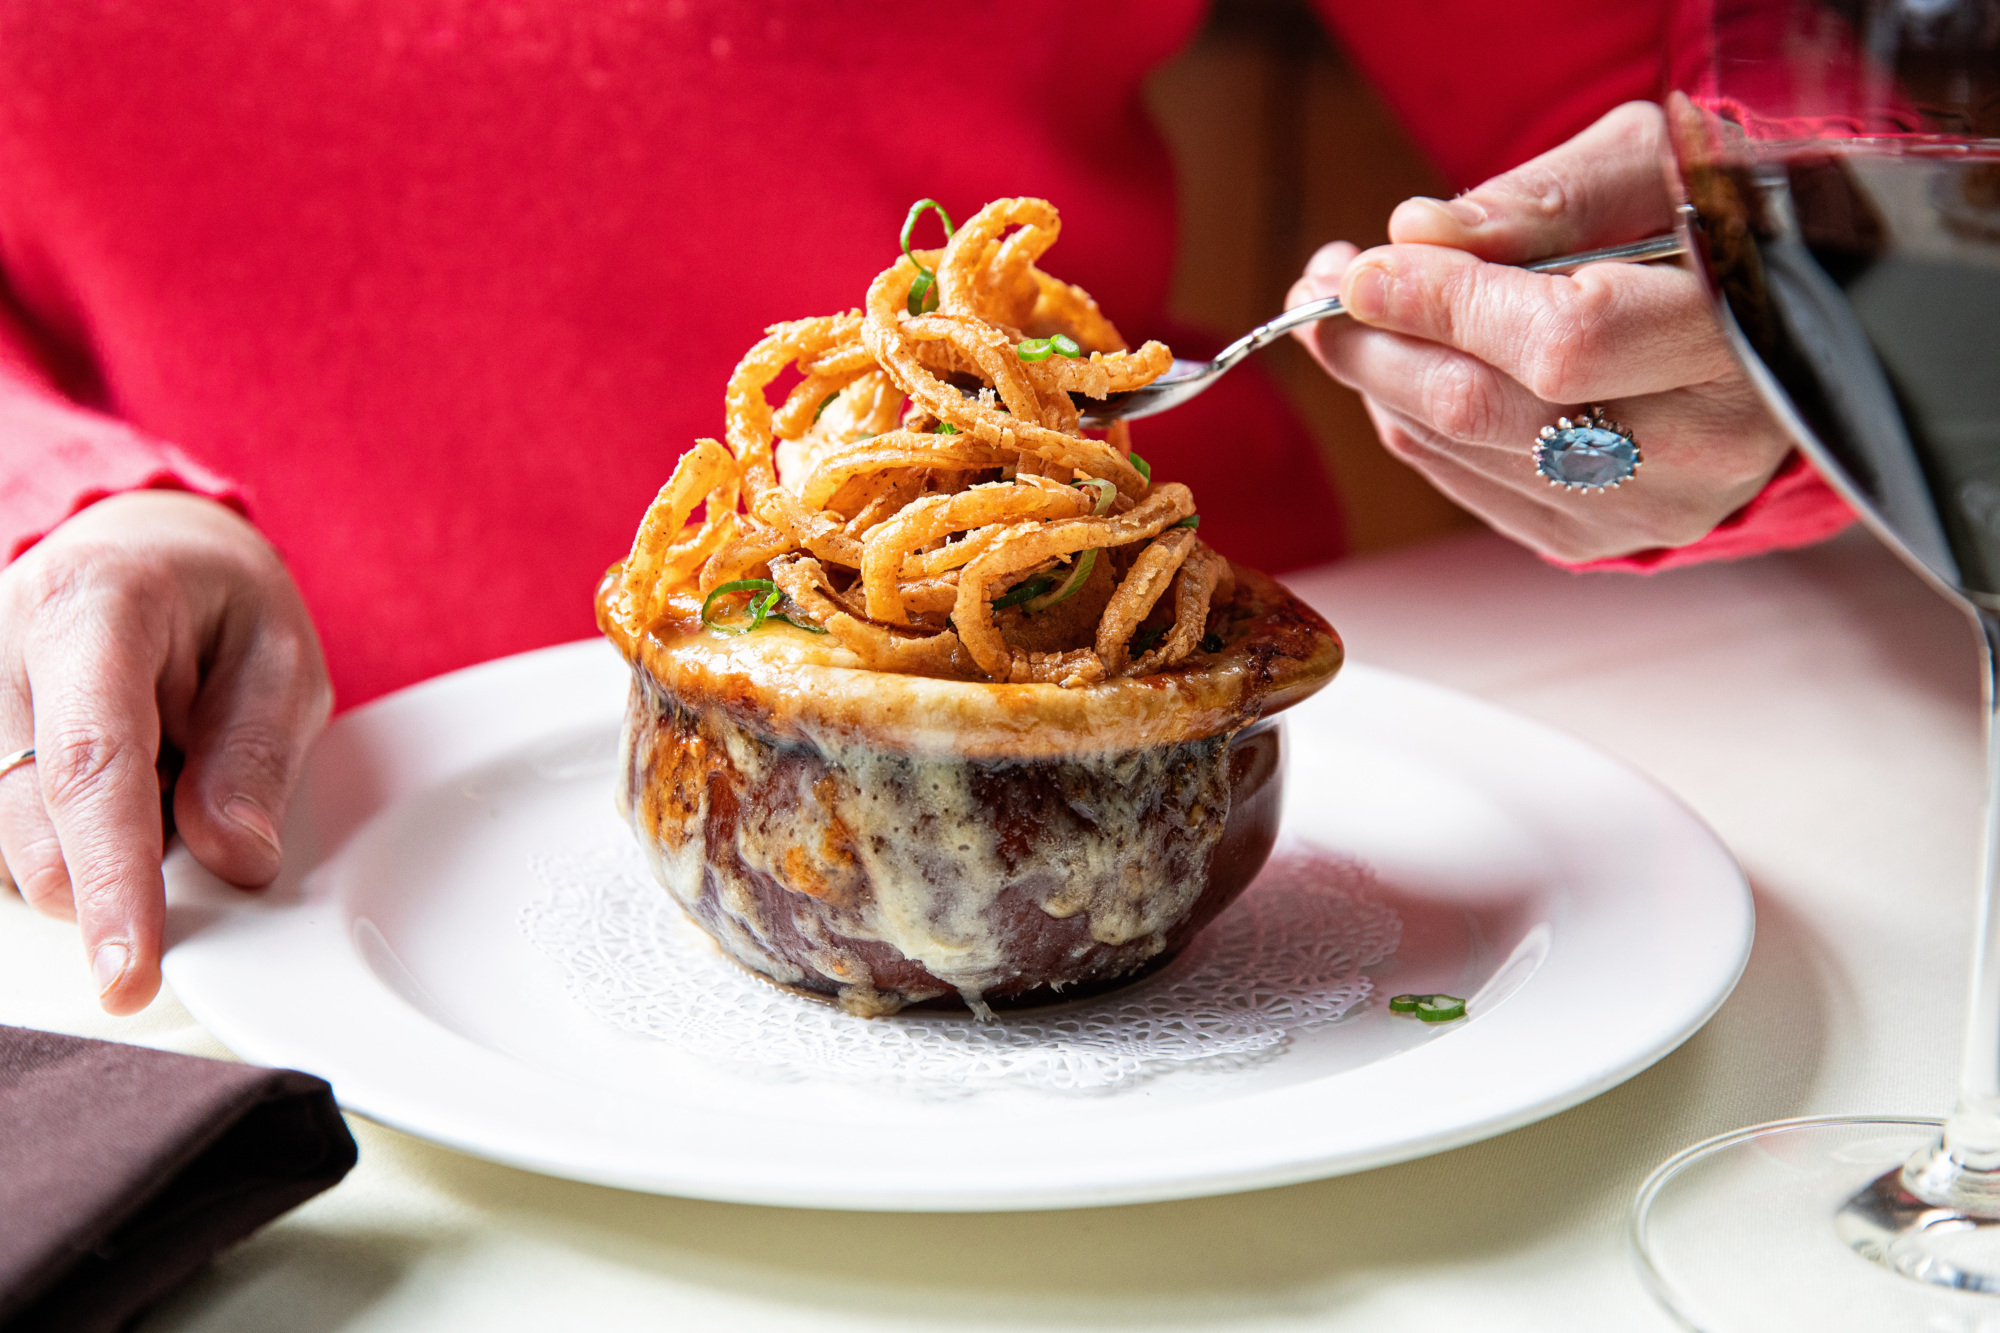 Halls' French onion soup.